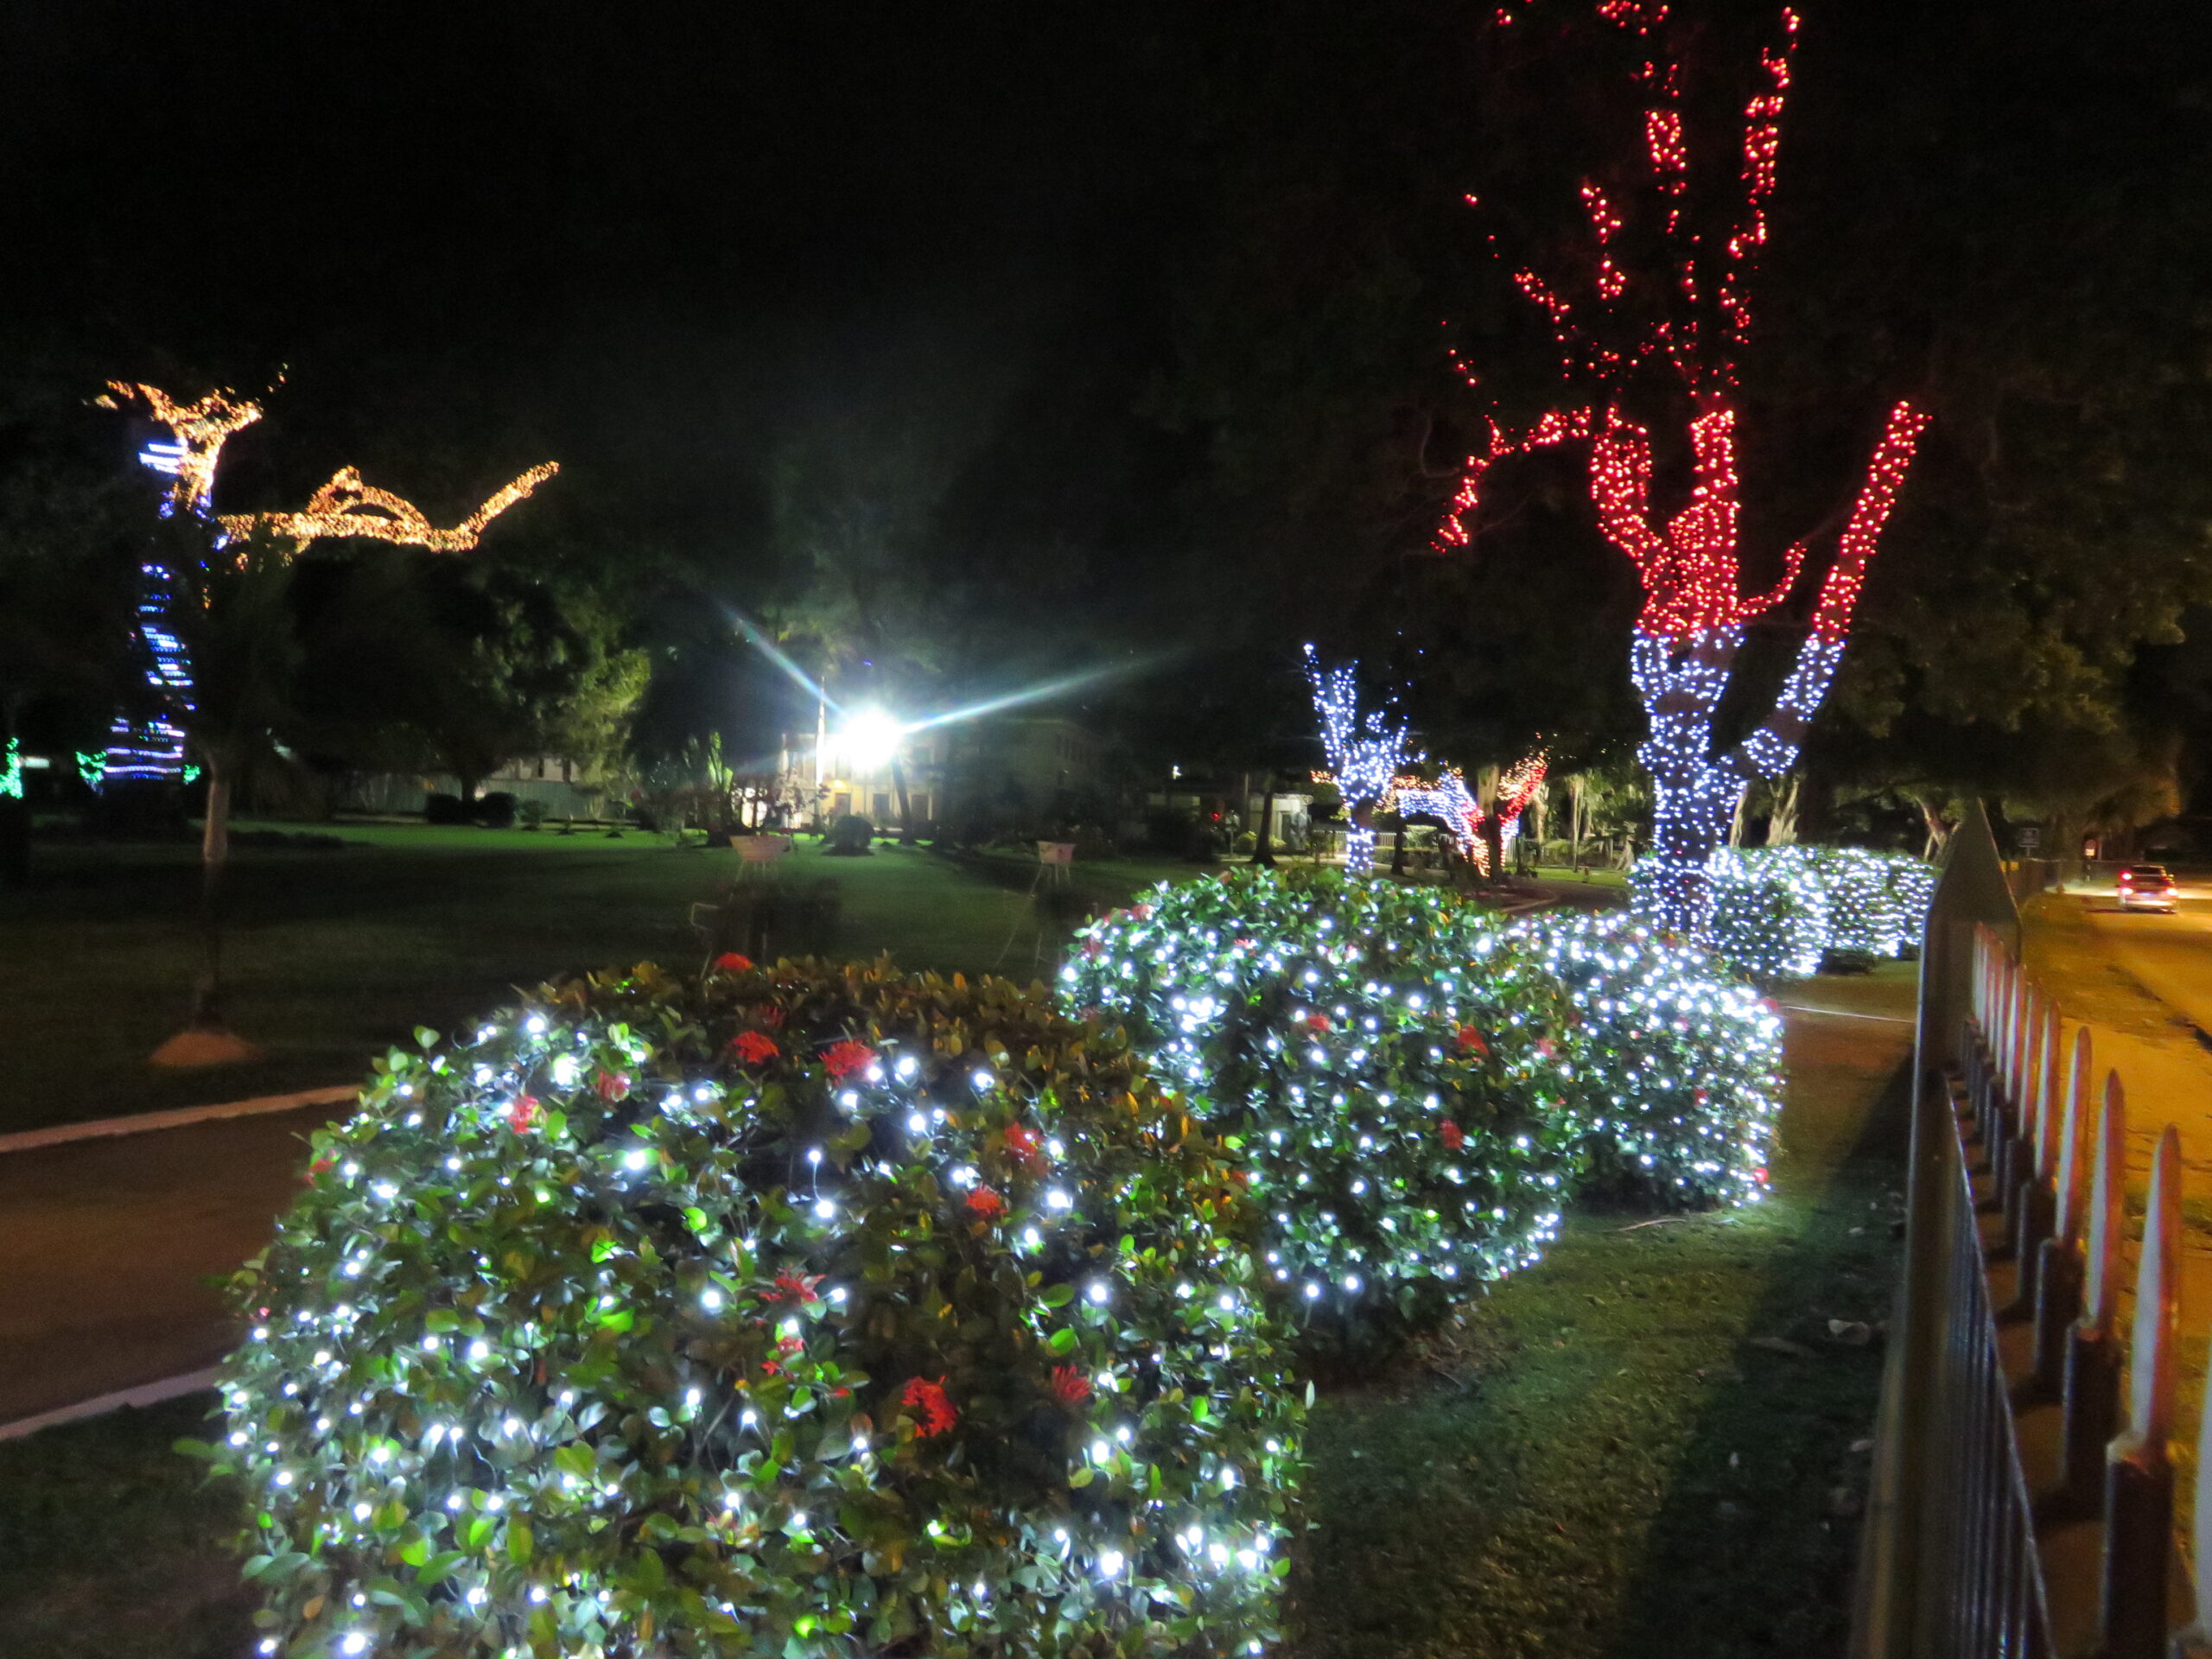 The Best Destinations in Trinidad to get into the spirit of Christmas